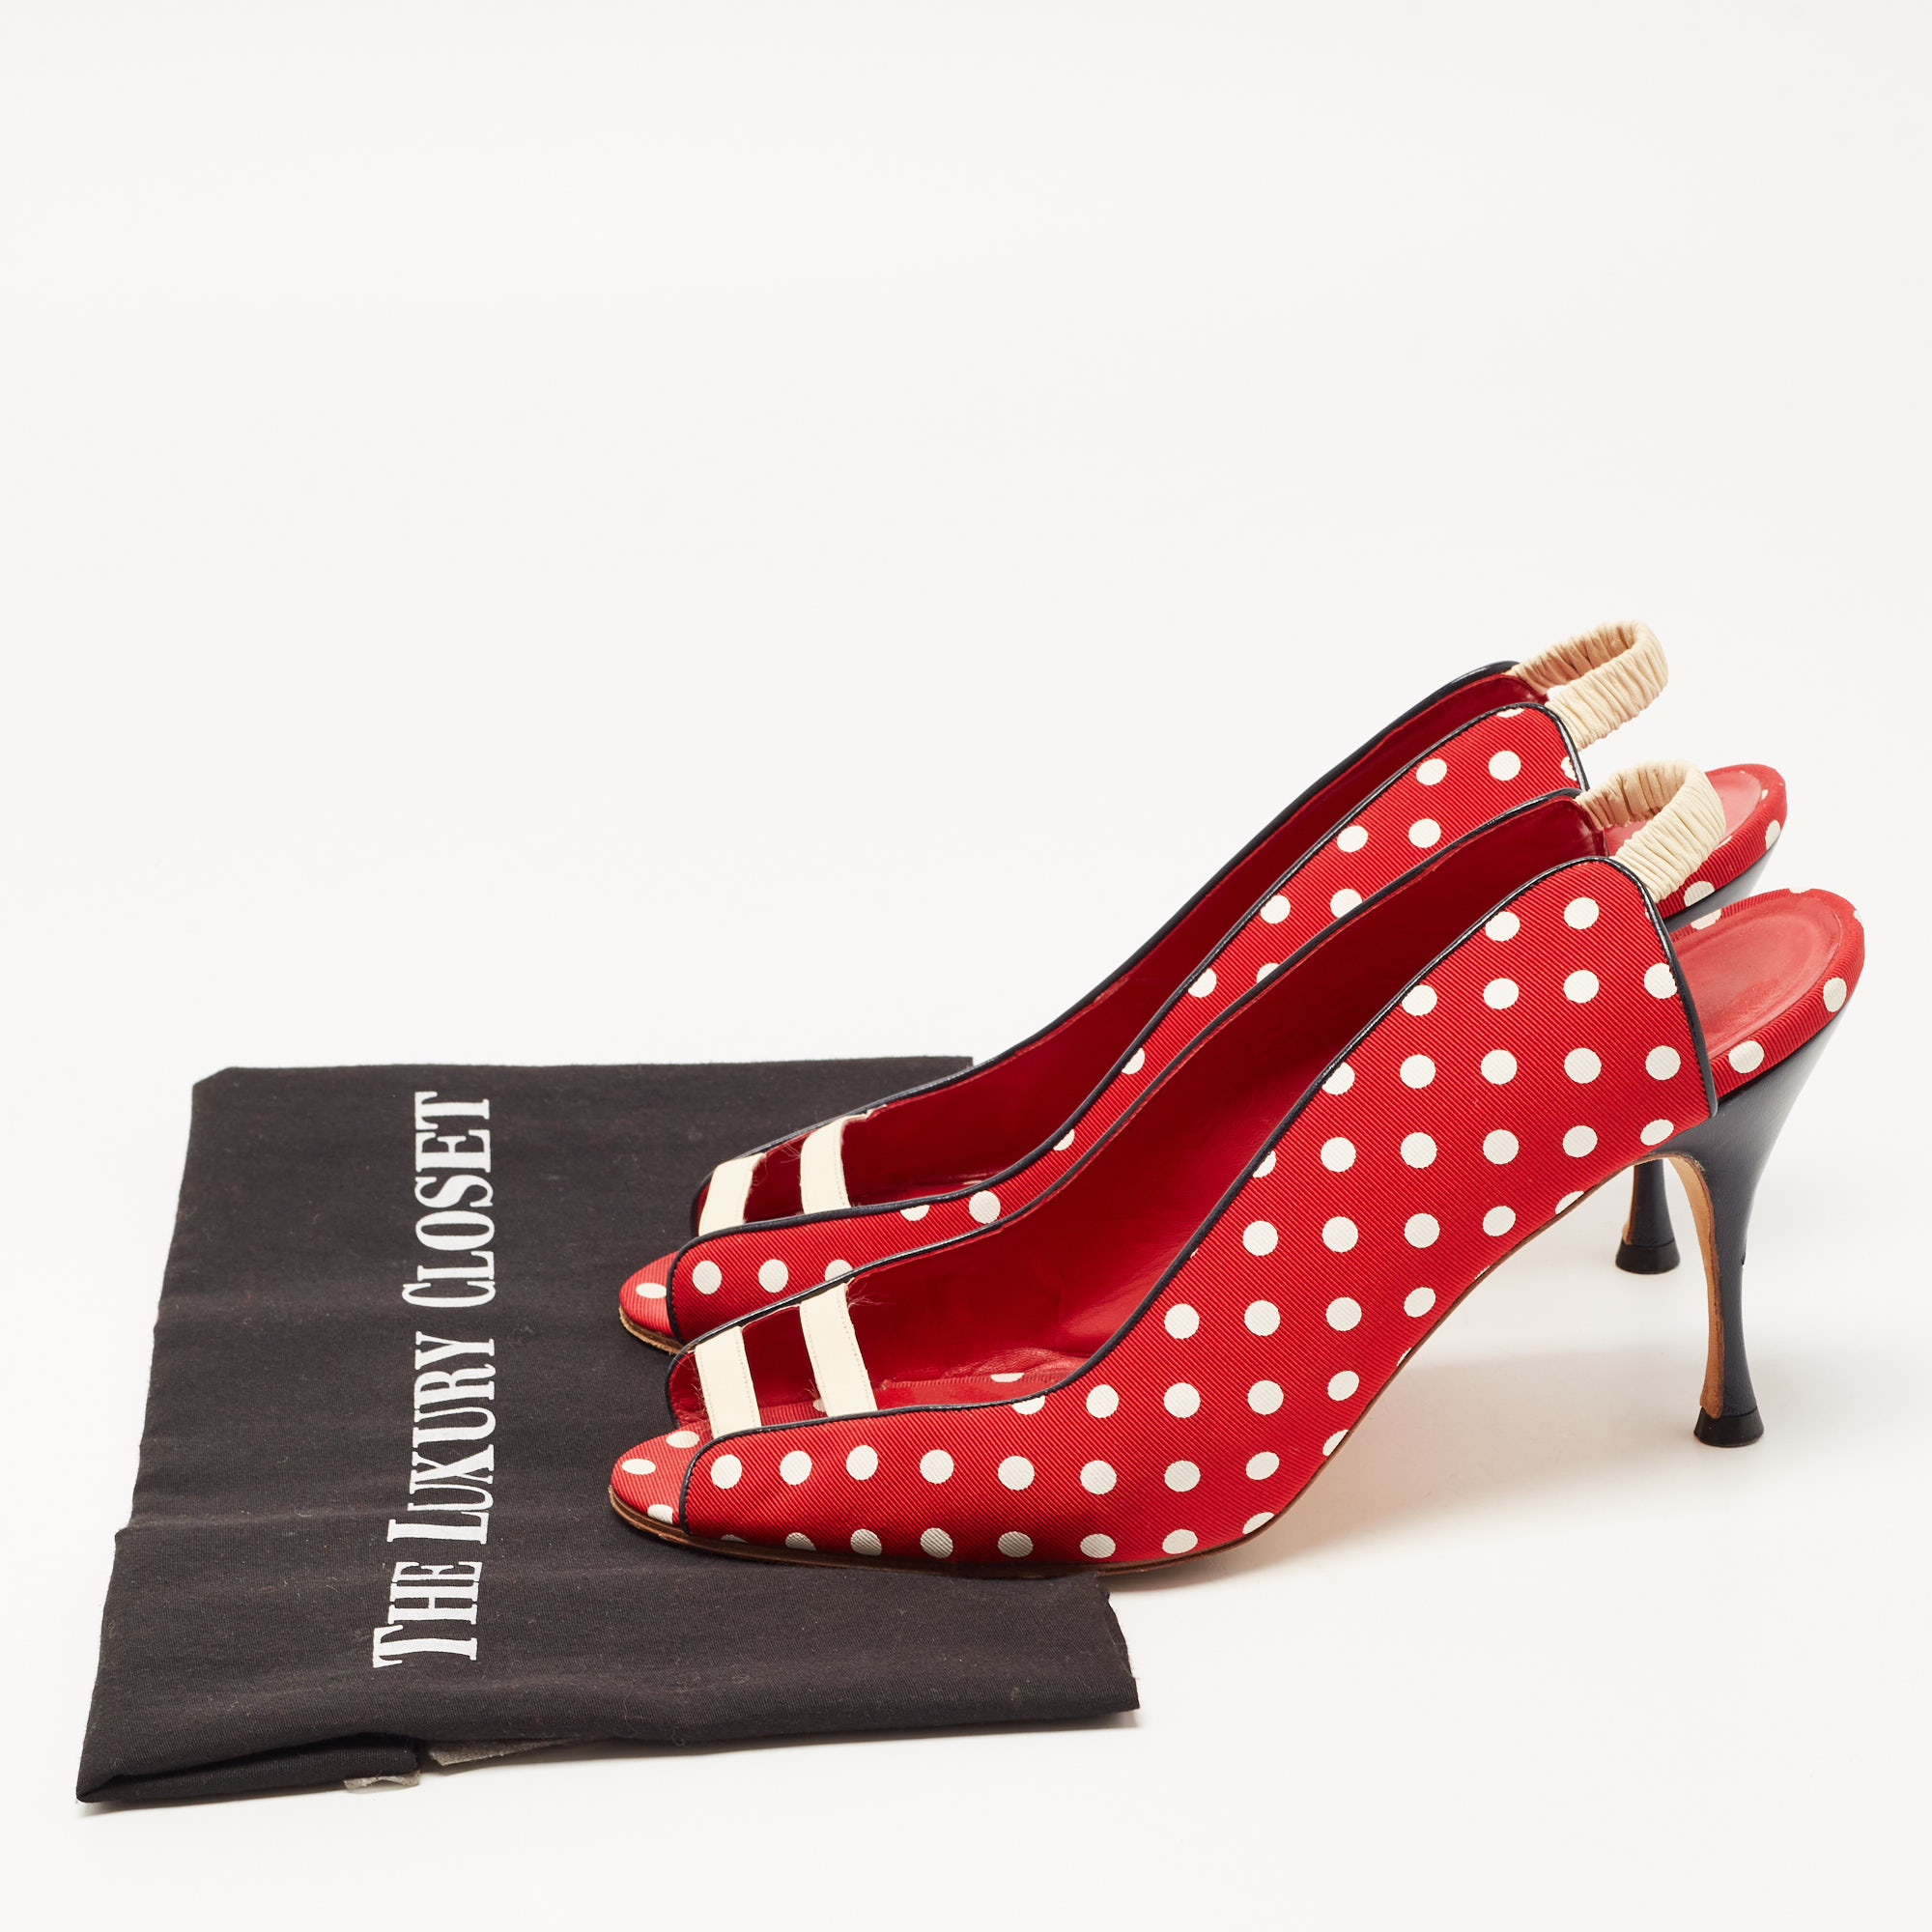 Manolo Blahnik Red Canvas And Leather Polka Dot Slingback Sandals Size 40